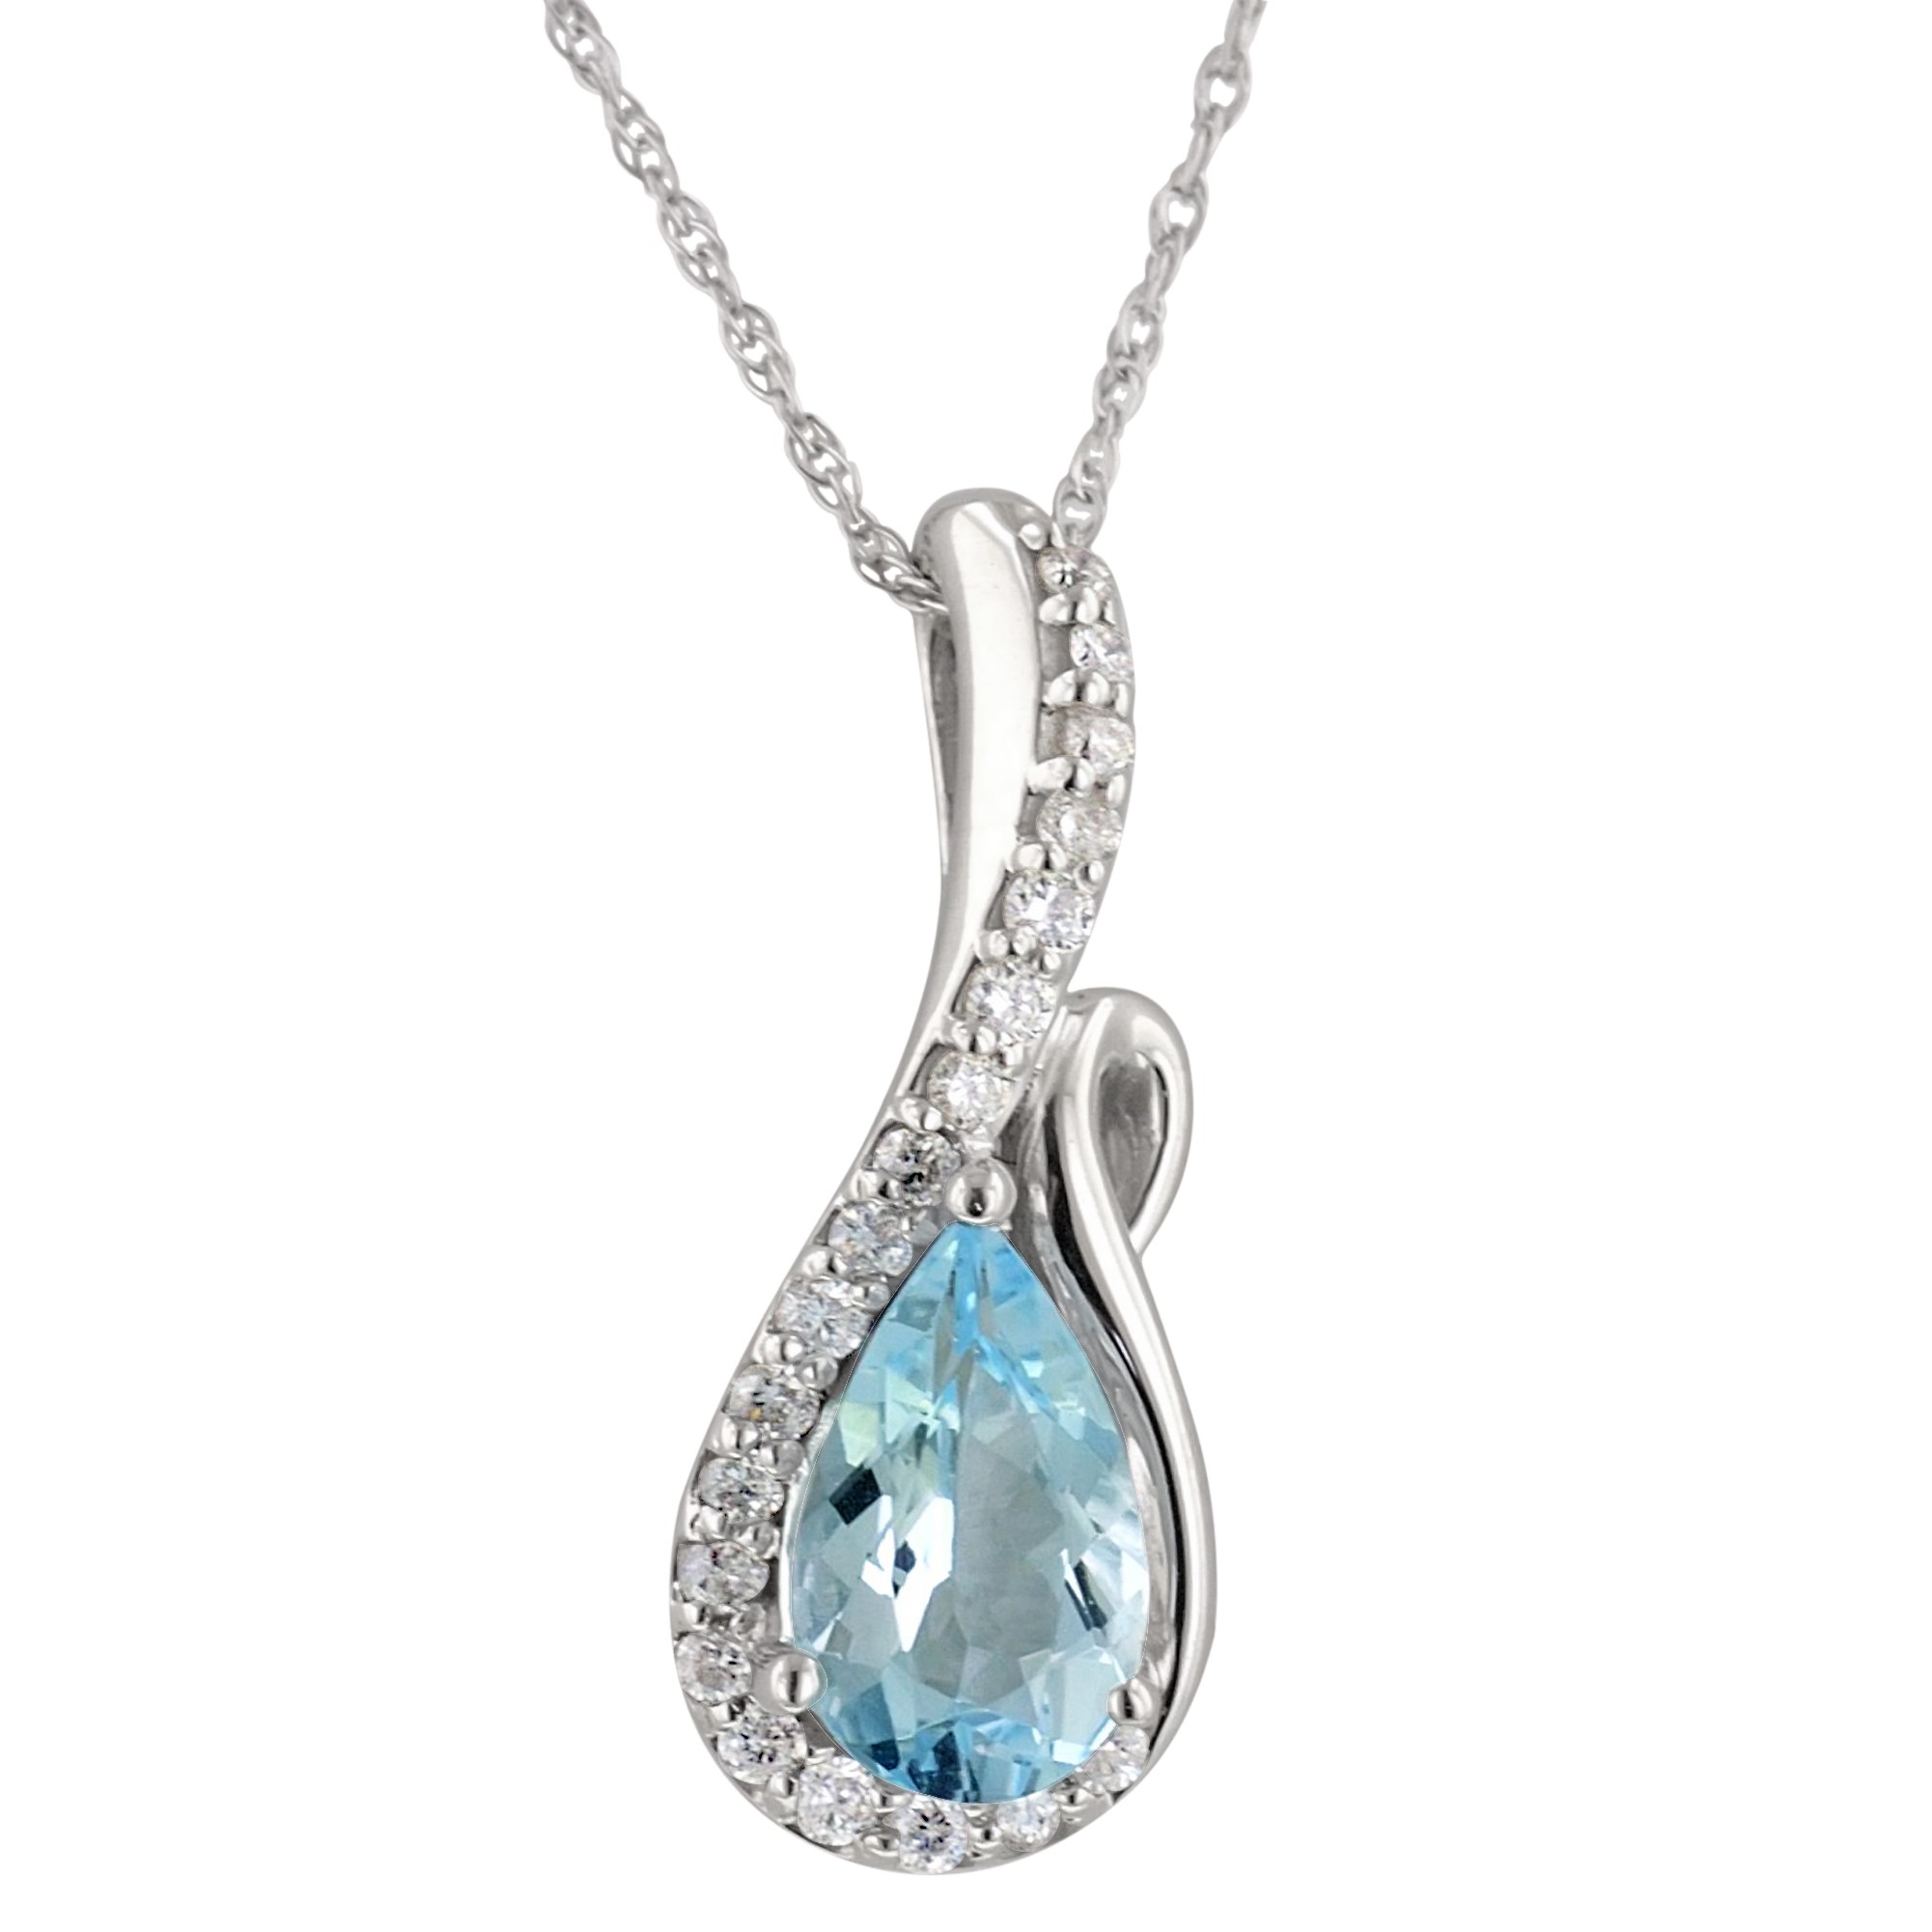 Get Aquamarine Necklace for its Beauty